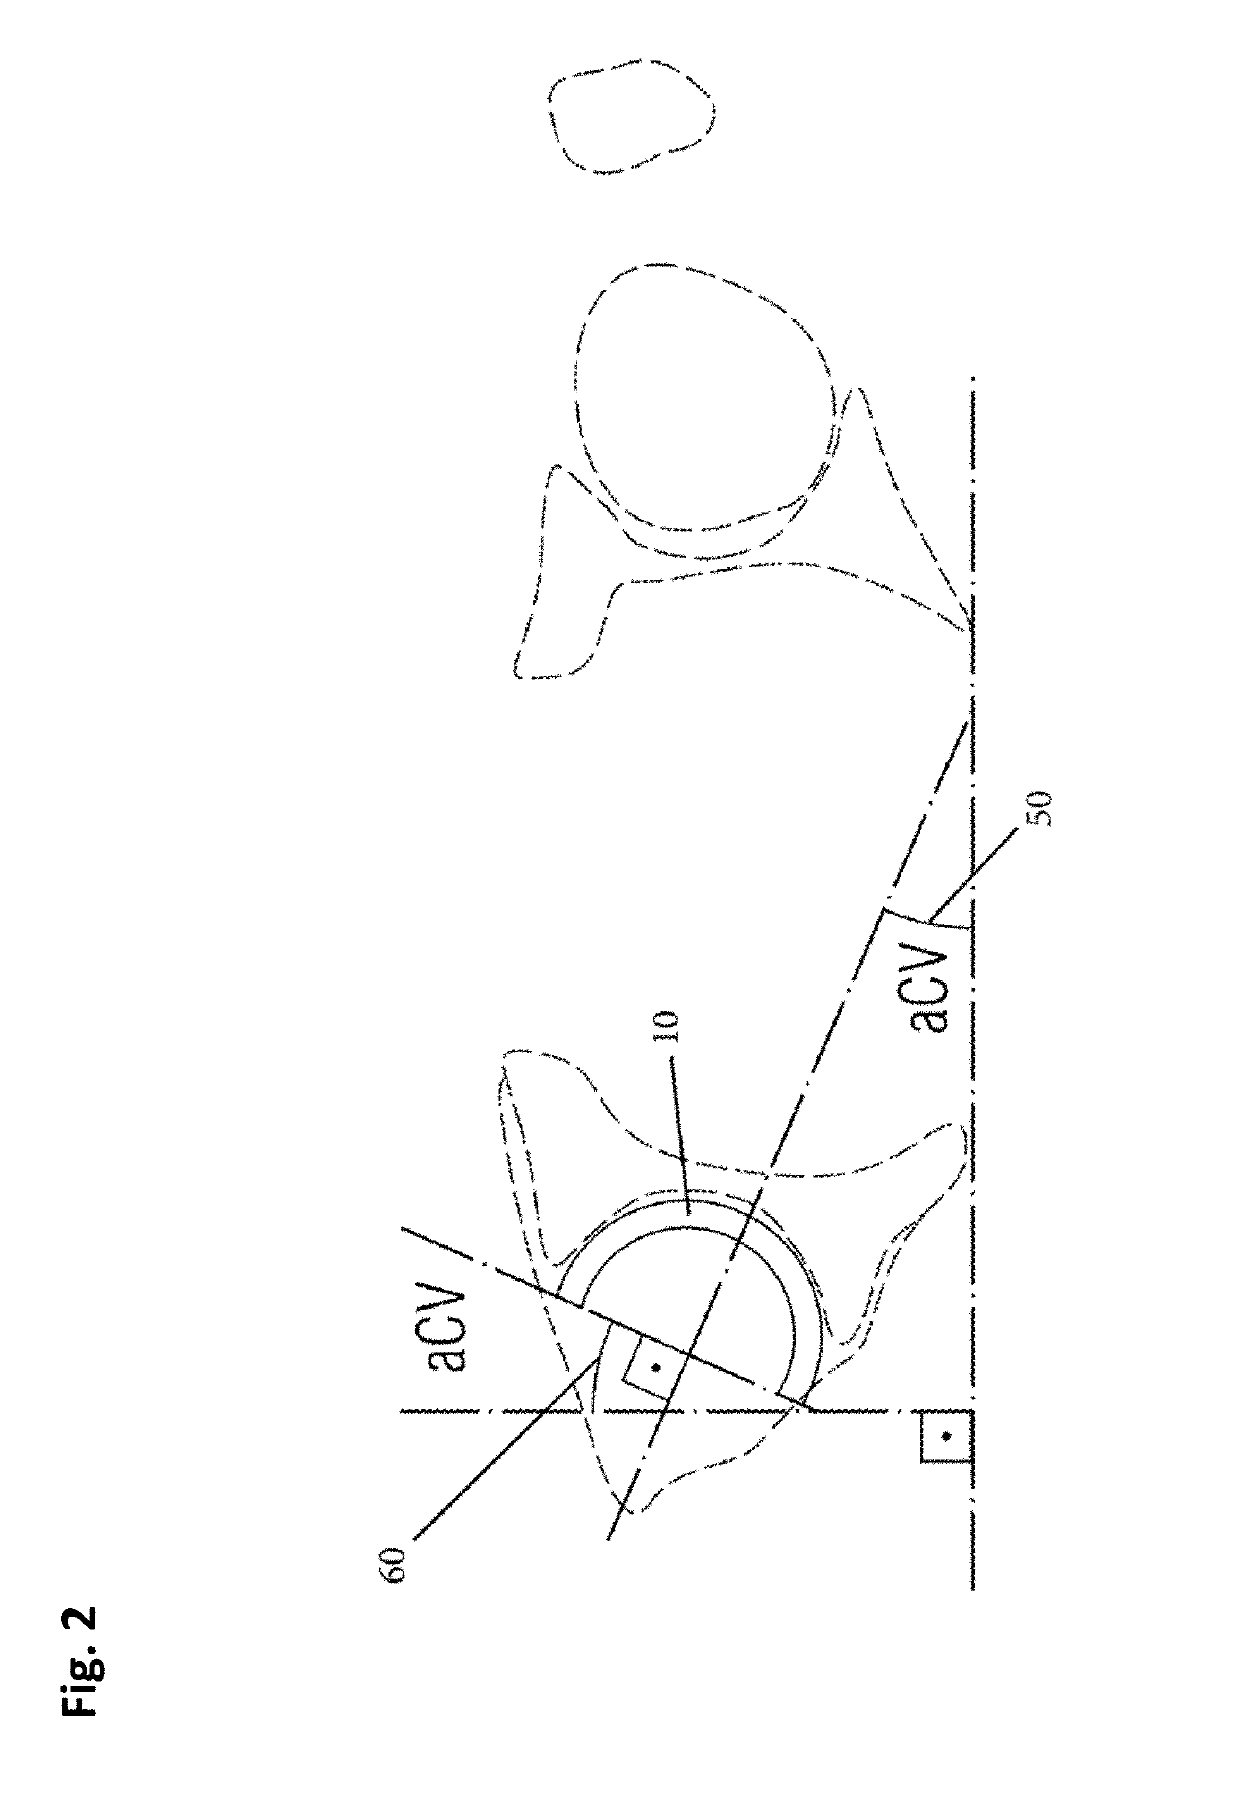 Fluoroscopy-Based Measurement and Processing System and Method